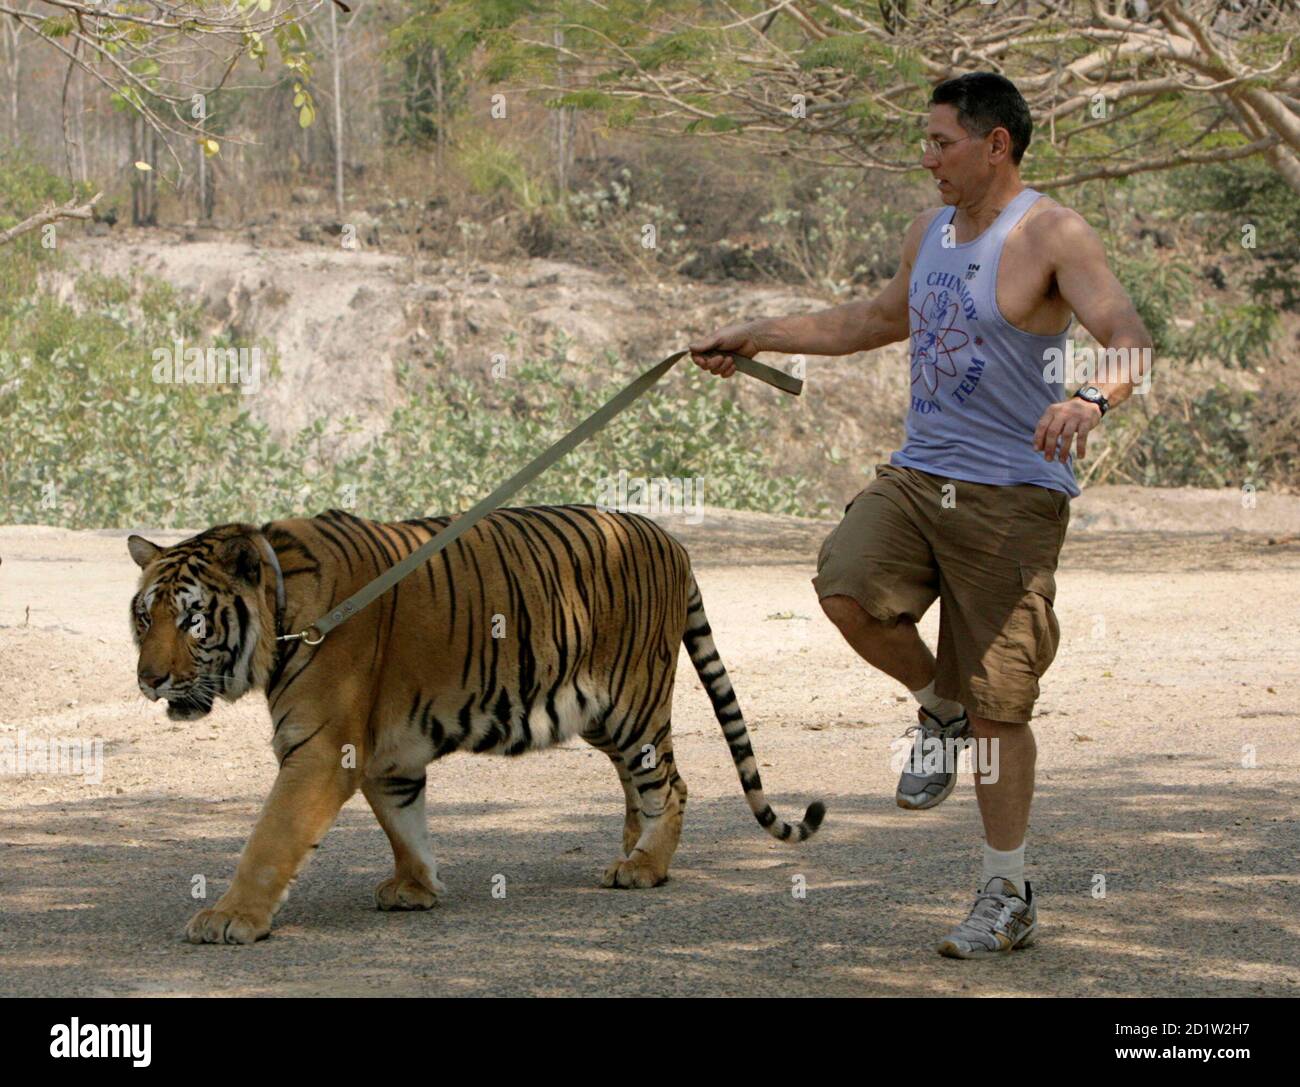 ontploffing Boer uitgebreid Ashrita Furman of the U.S. holds a tiger on a leash, at the start of a  world record attempt, while skipping at the Tiger Temple in Kanchanaburi  province, 120km (75 miles) north-west